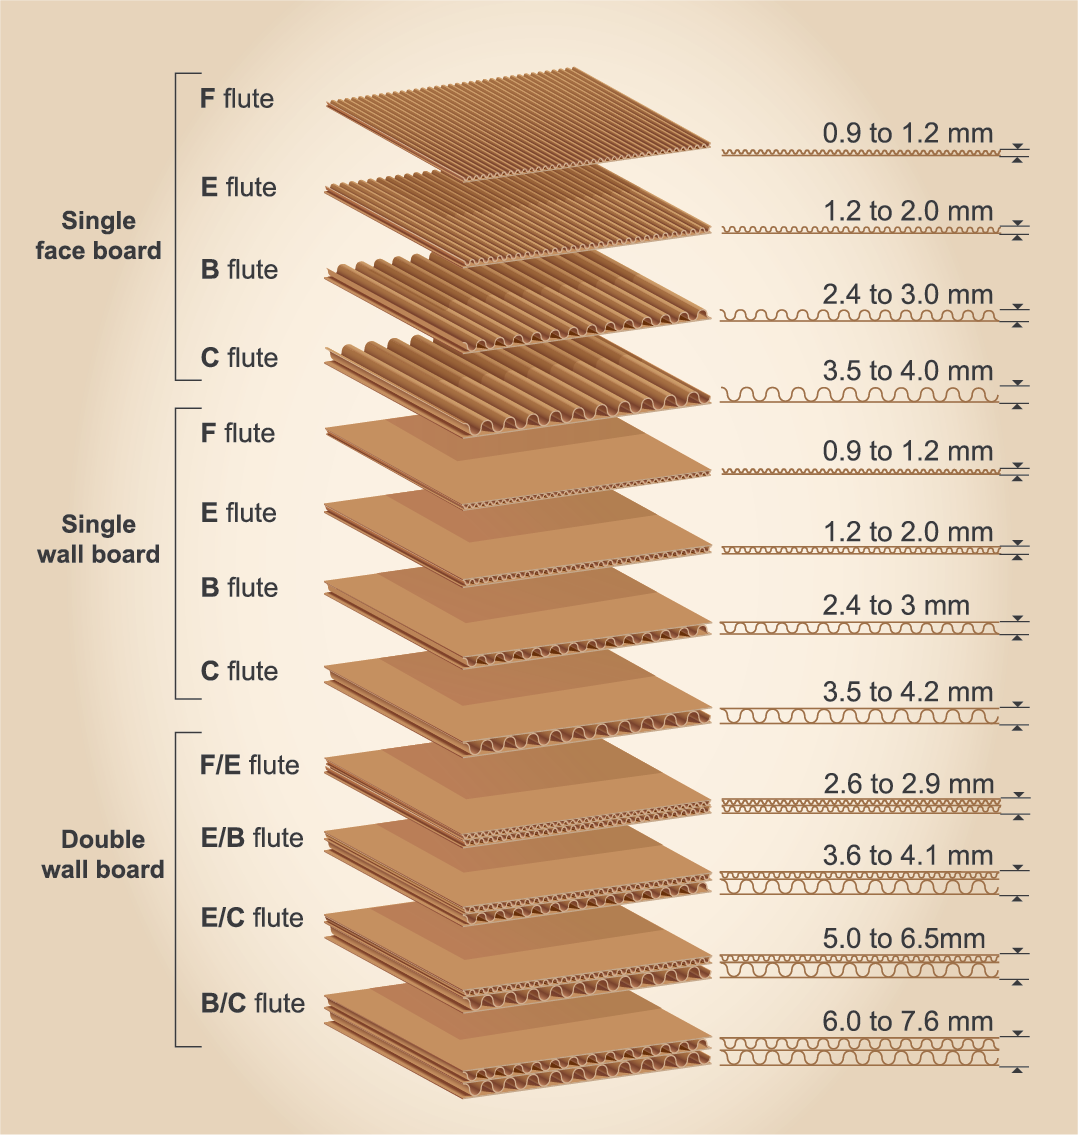 Types of corrugated sheets and flute structures